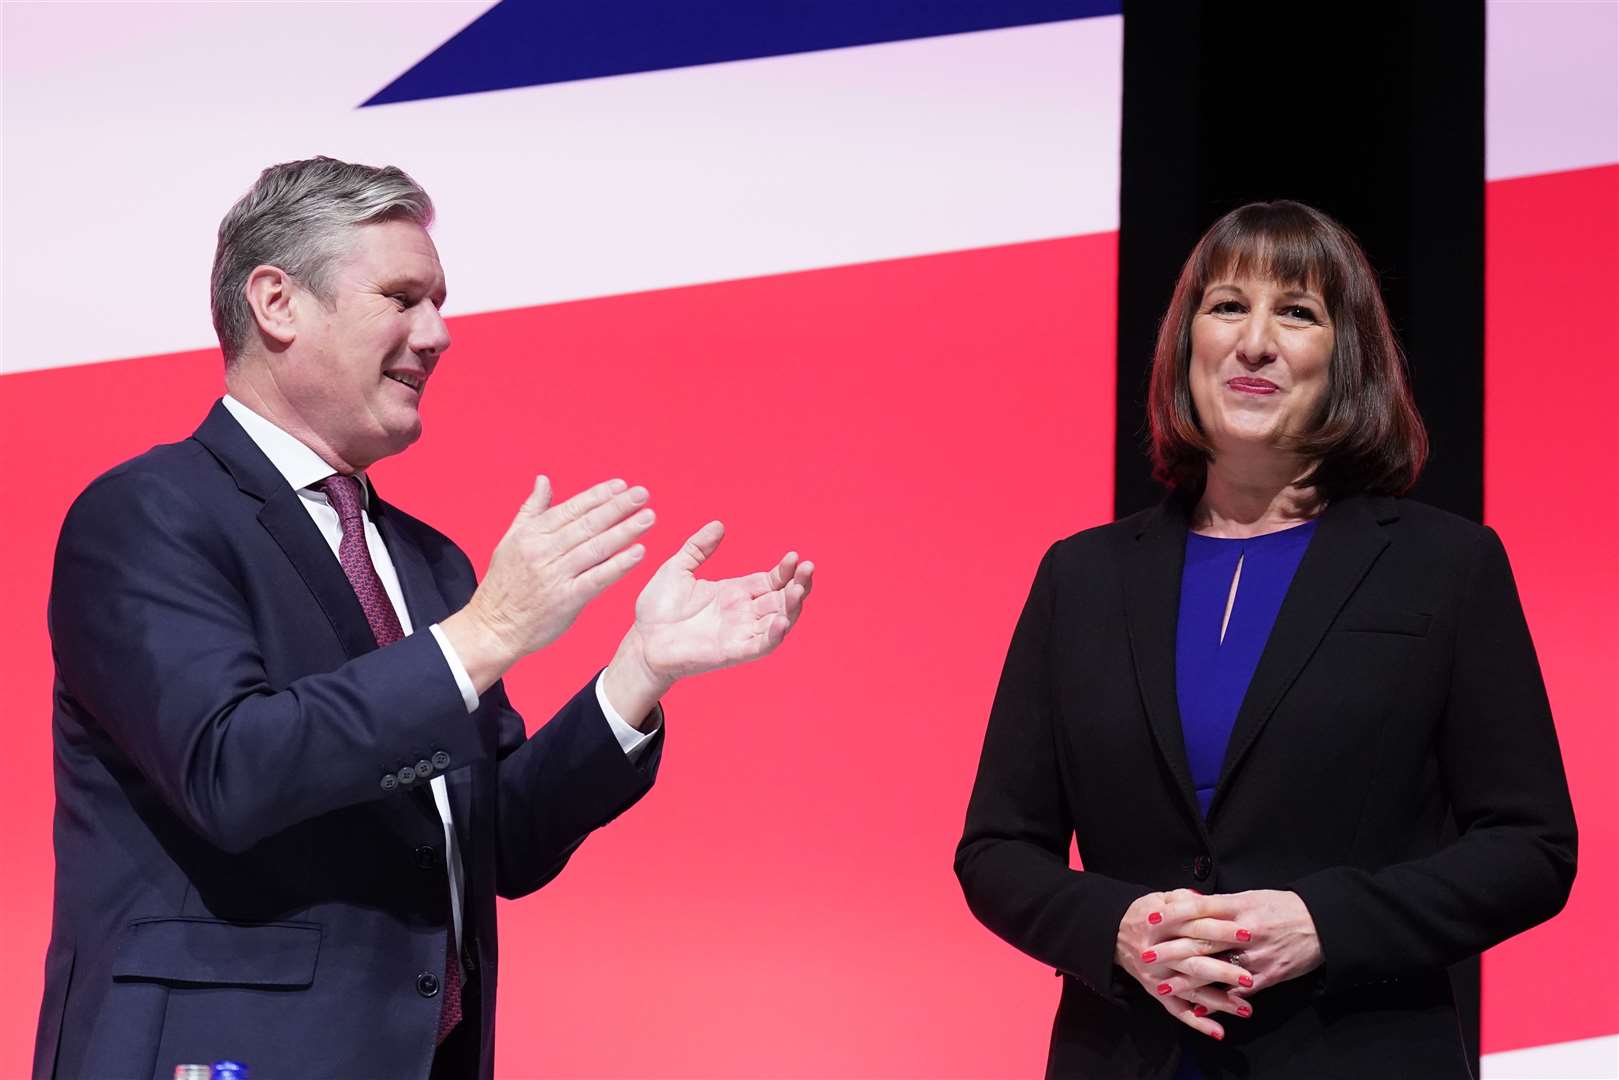 Party leader Sir Keir Starmer applauds shadow chancellor Rachel Reeves at the end of her keynote speech during the Labour Party conference (Stefan Rousseau/PA)